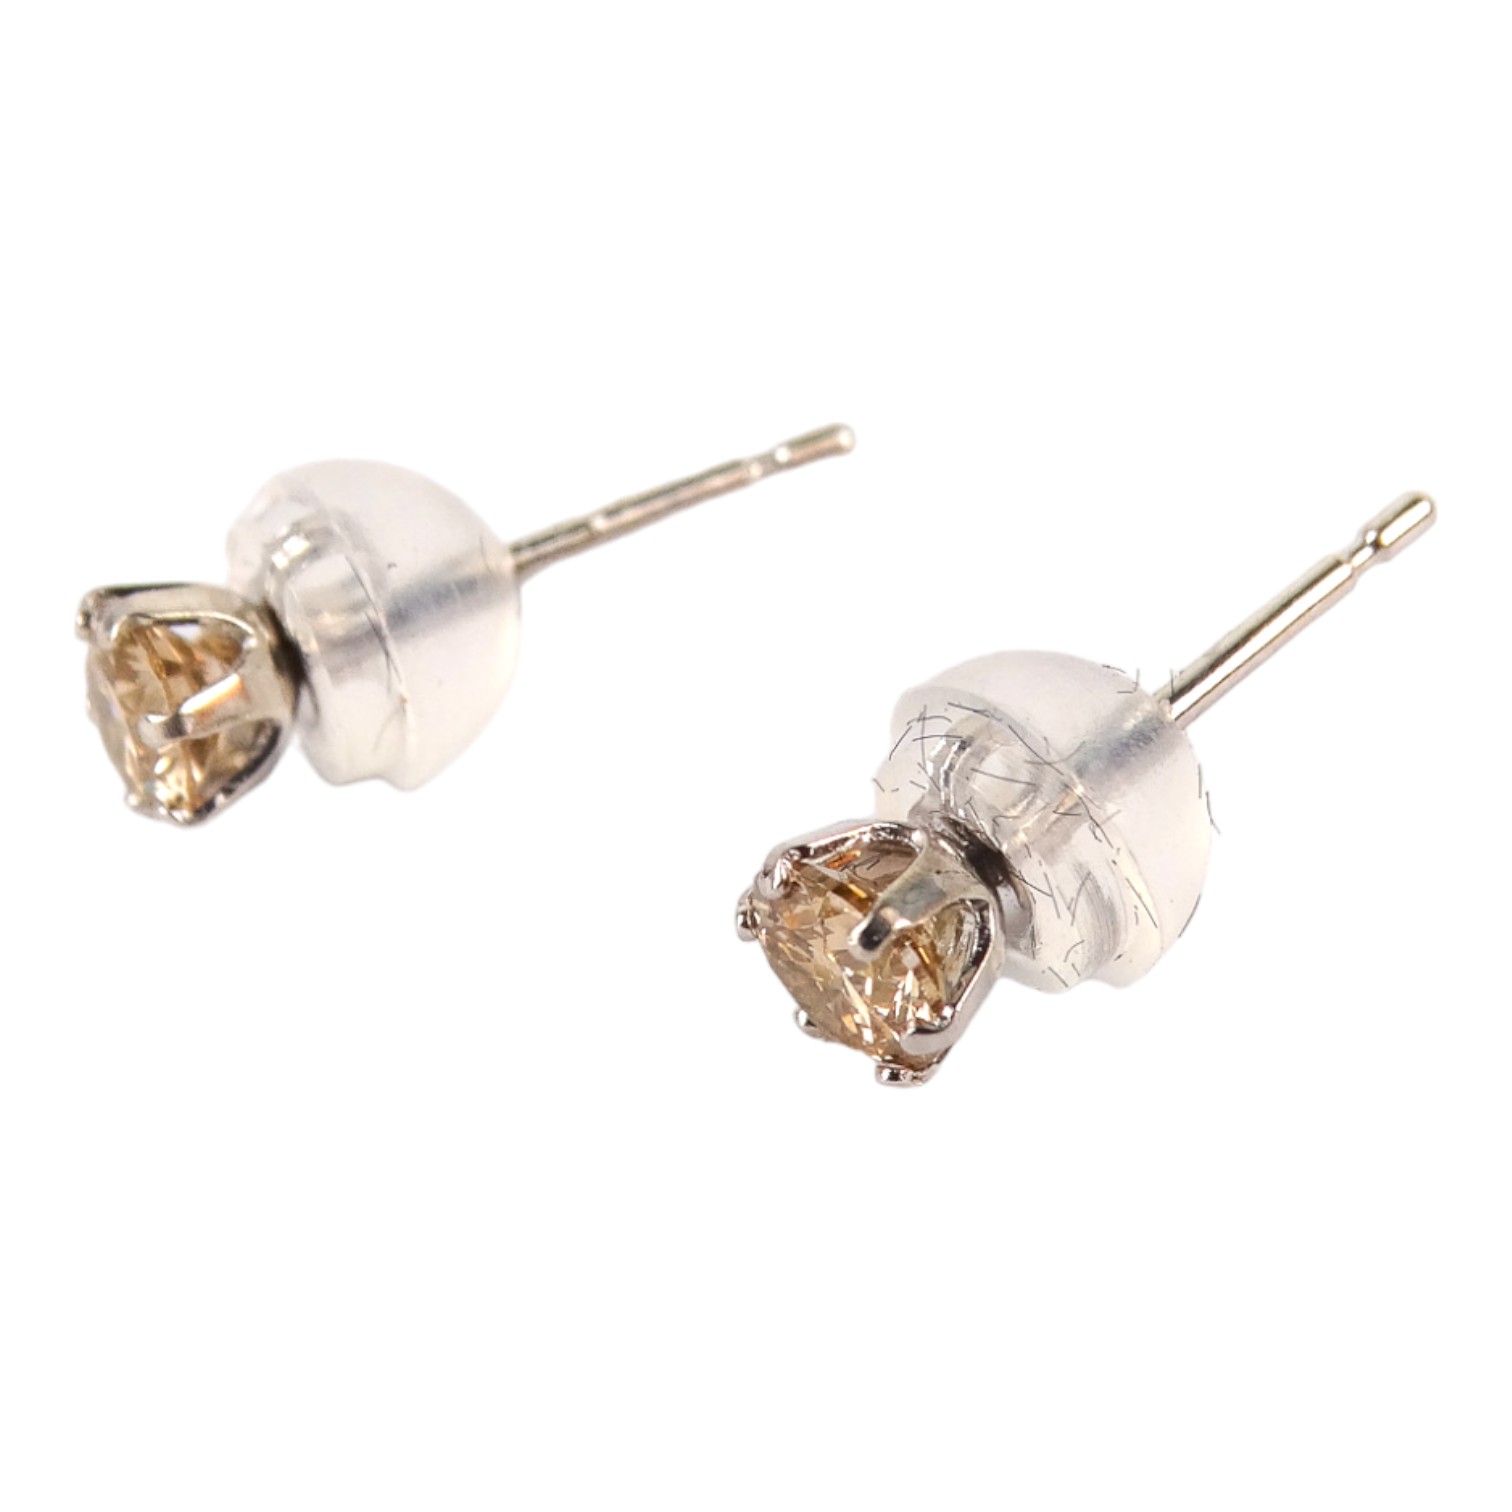 A pair of 18ct white gold diamond solitaire stud earrings - diamond weight 0.40ct approximately, - Image 2 of 4